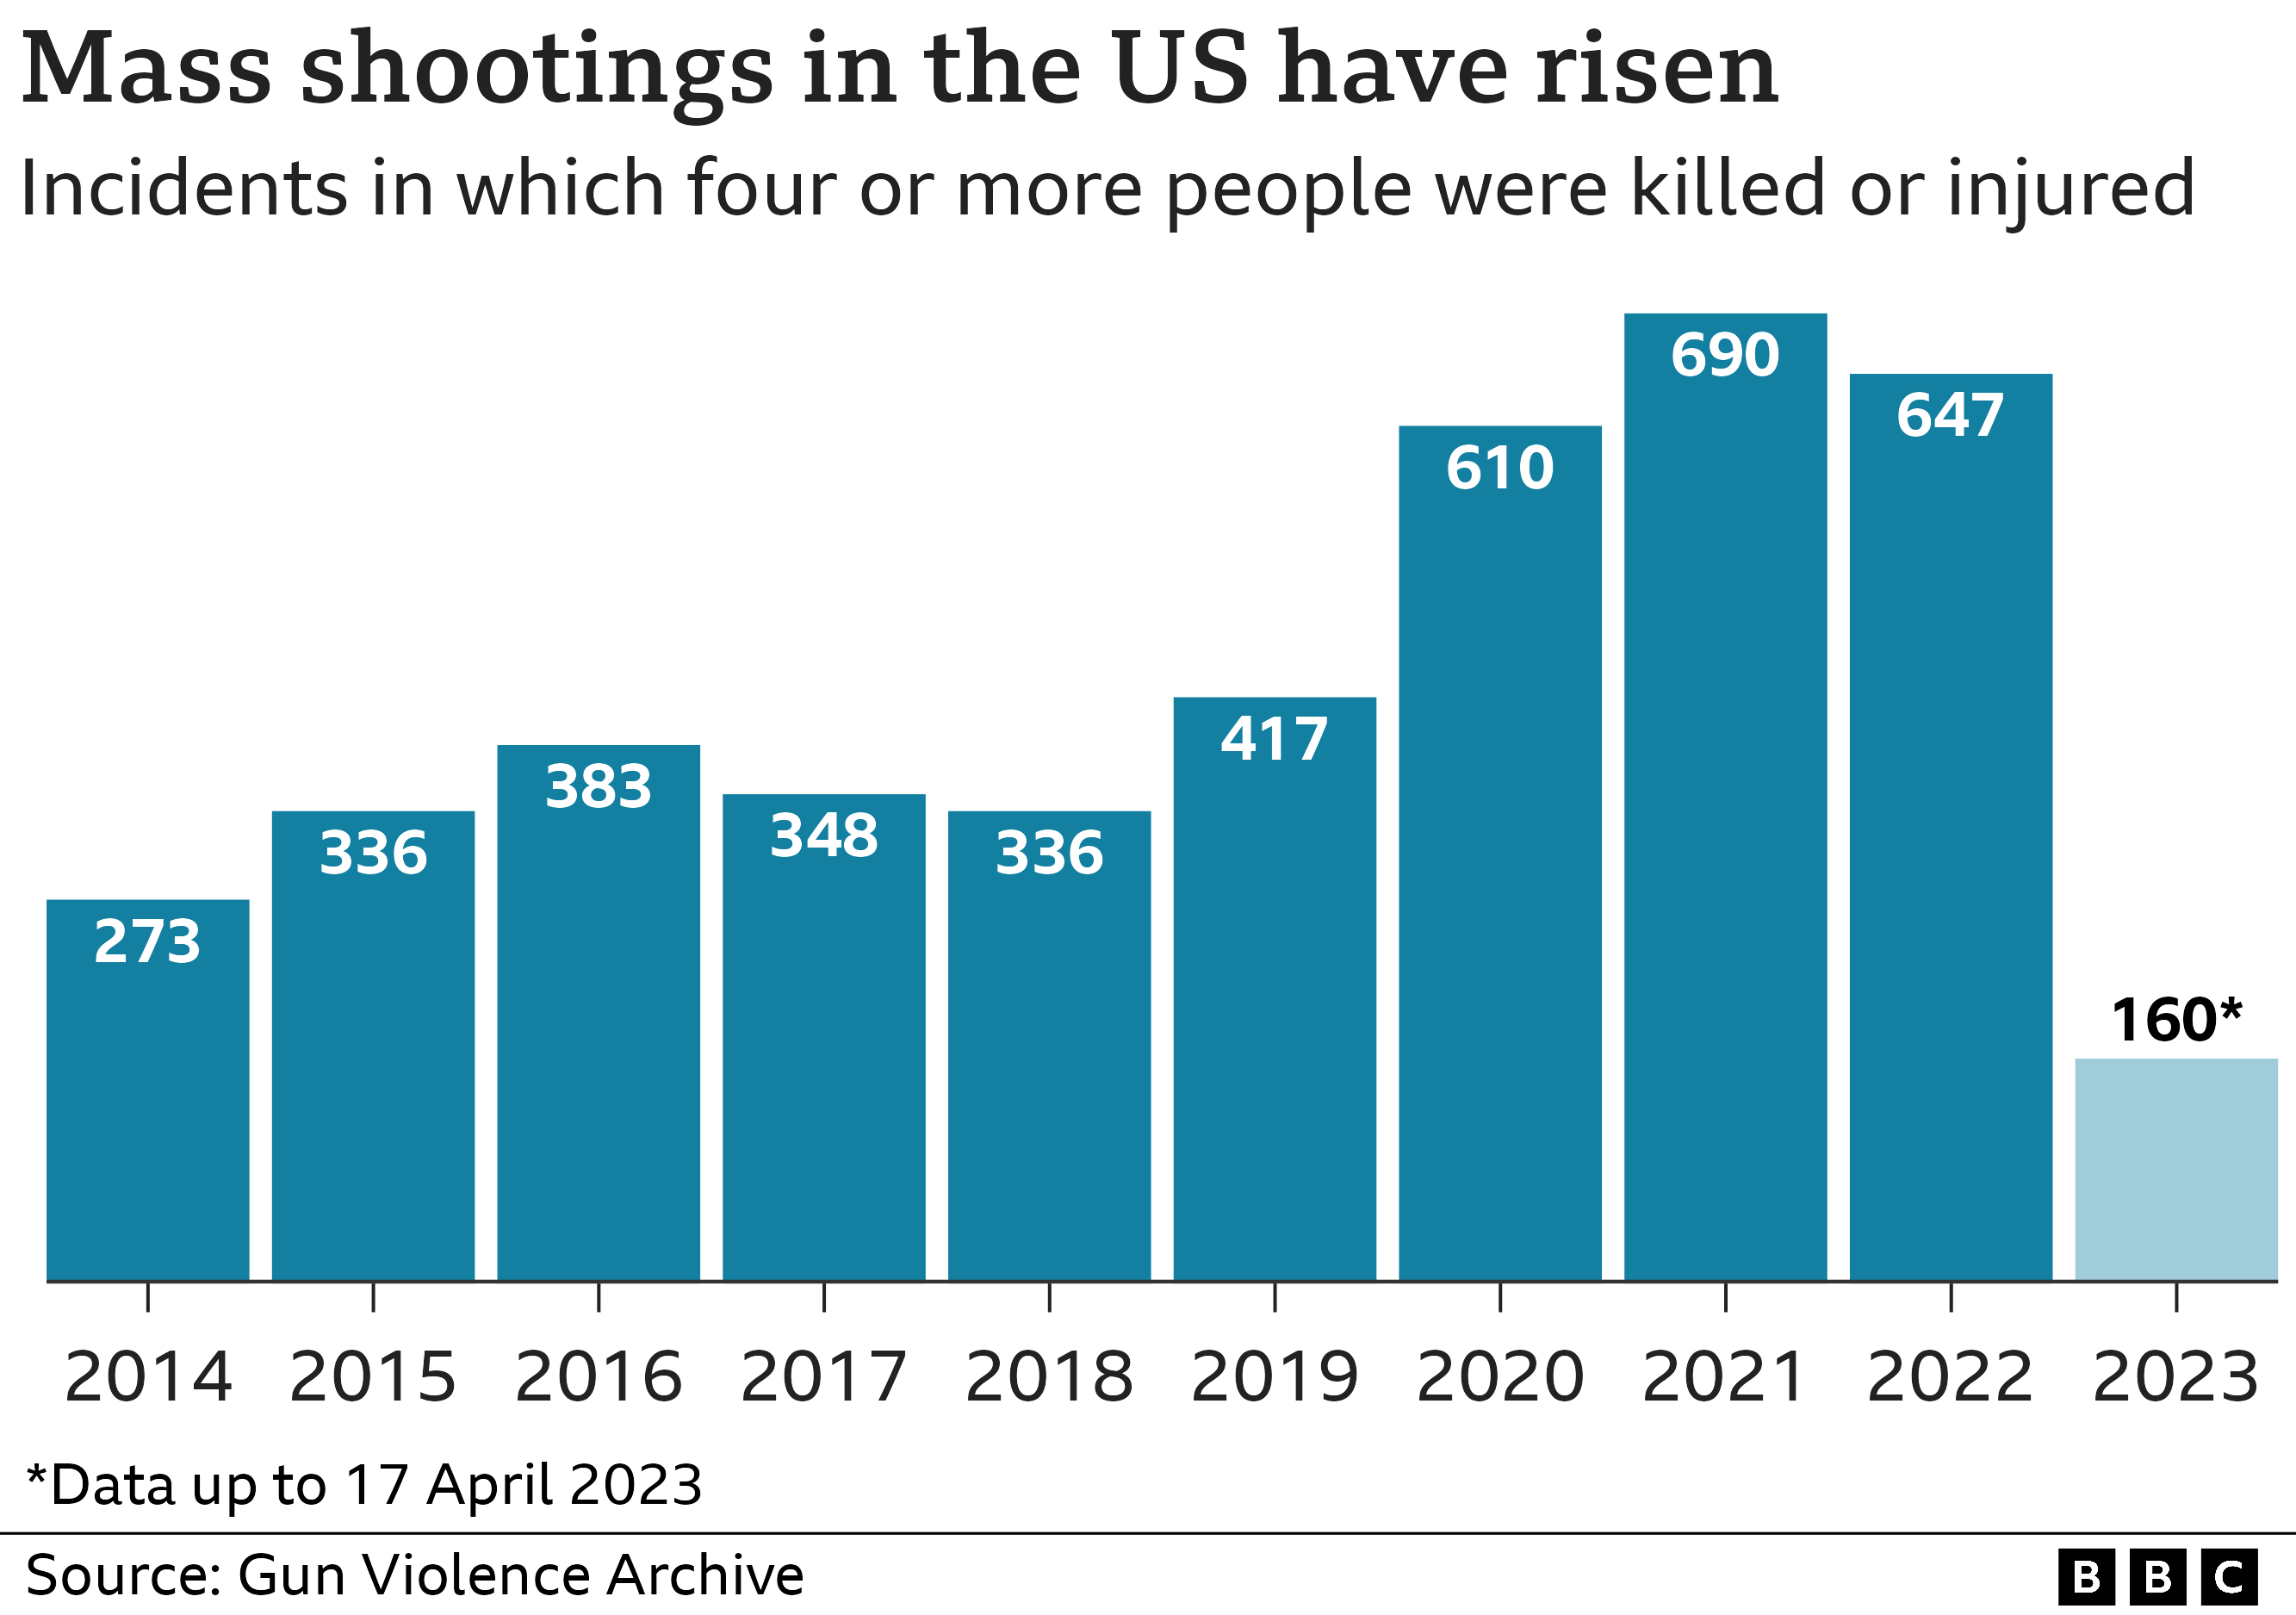 Mass shootings in the US